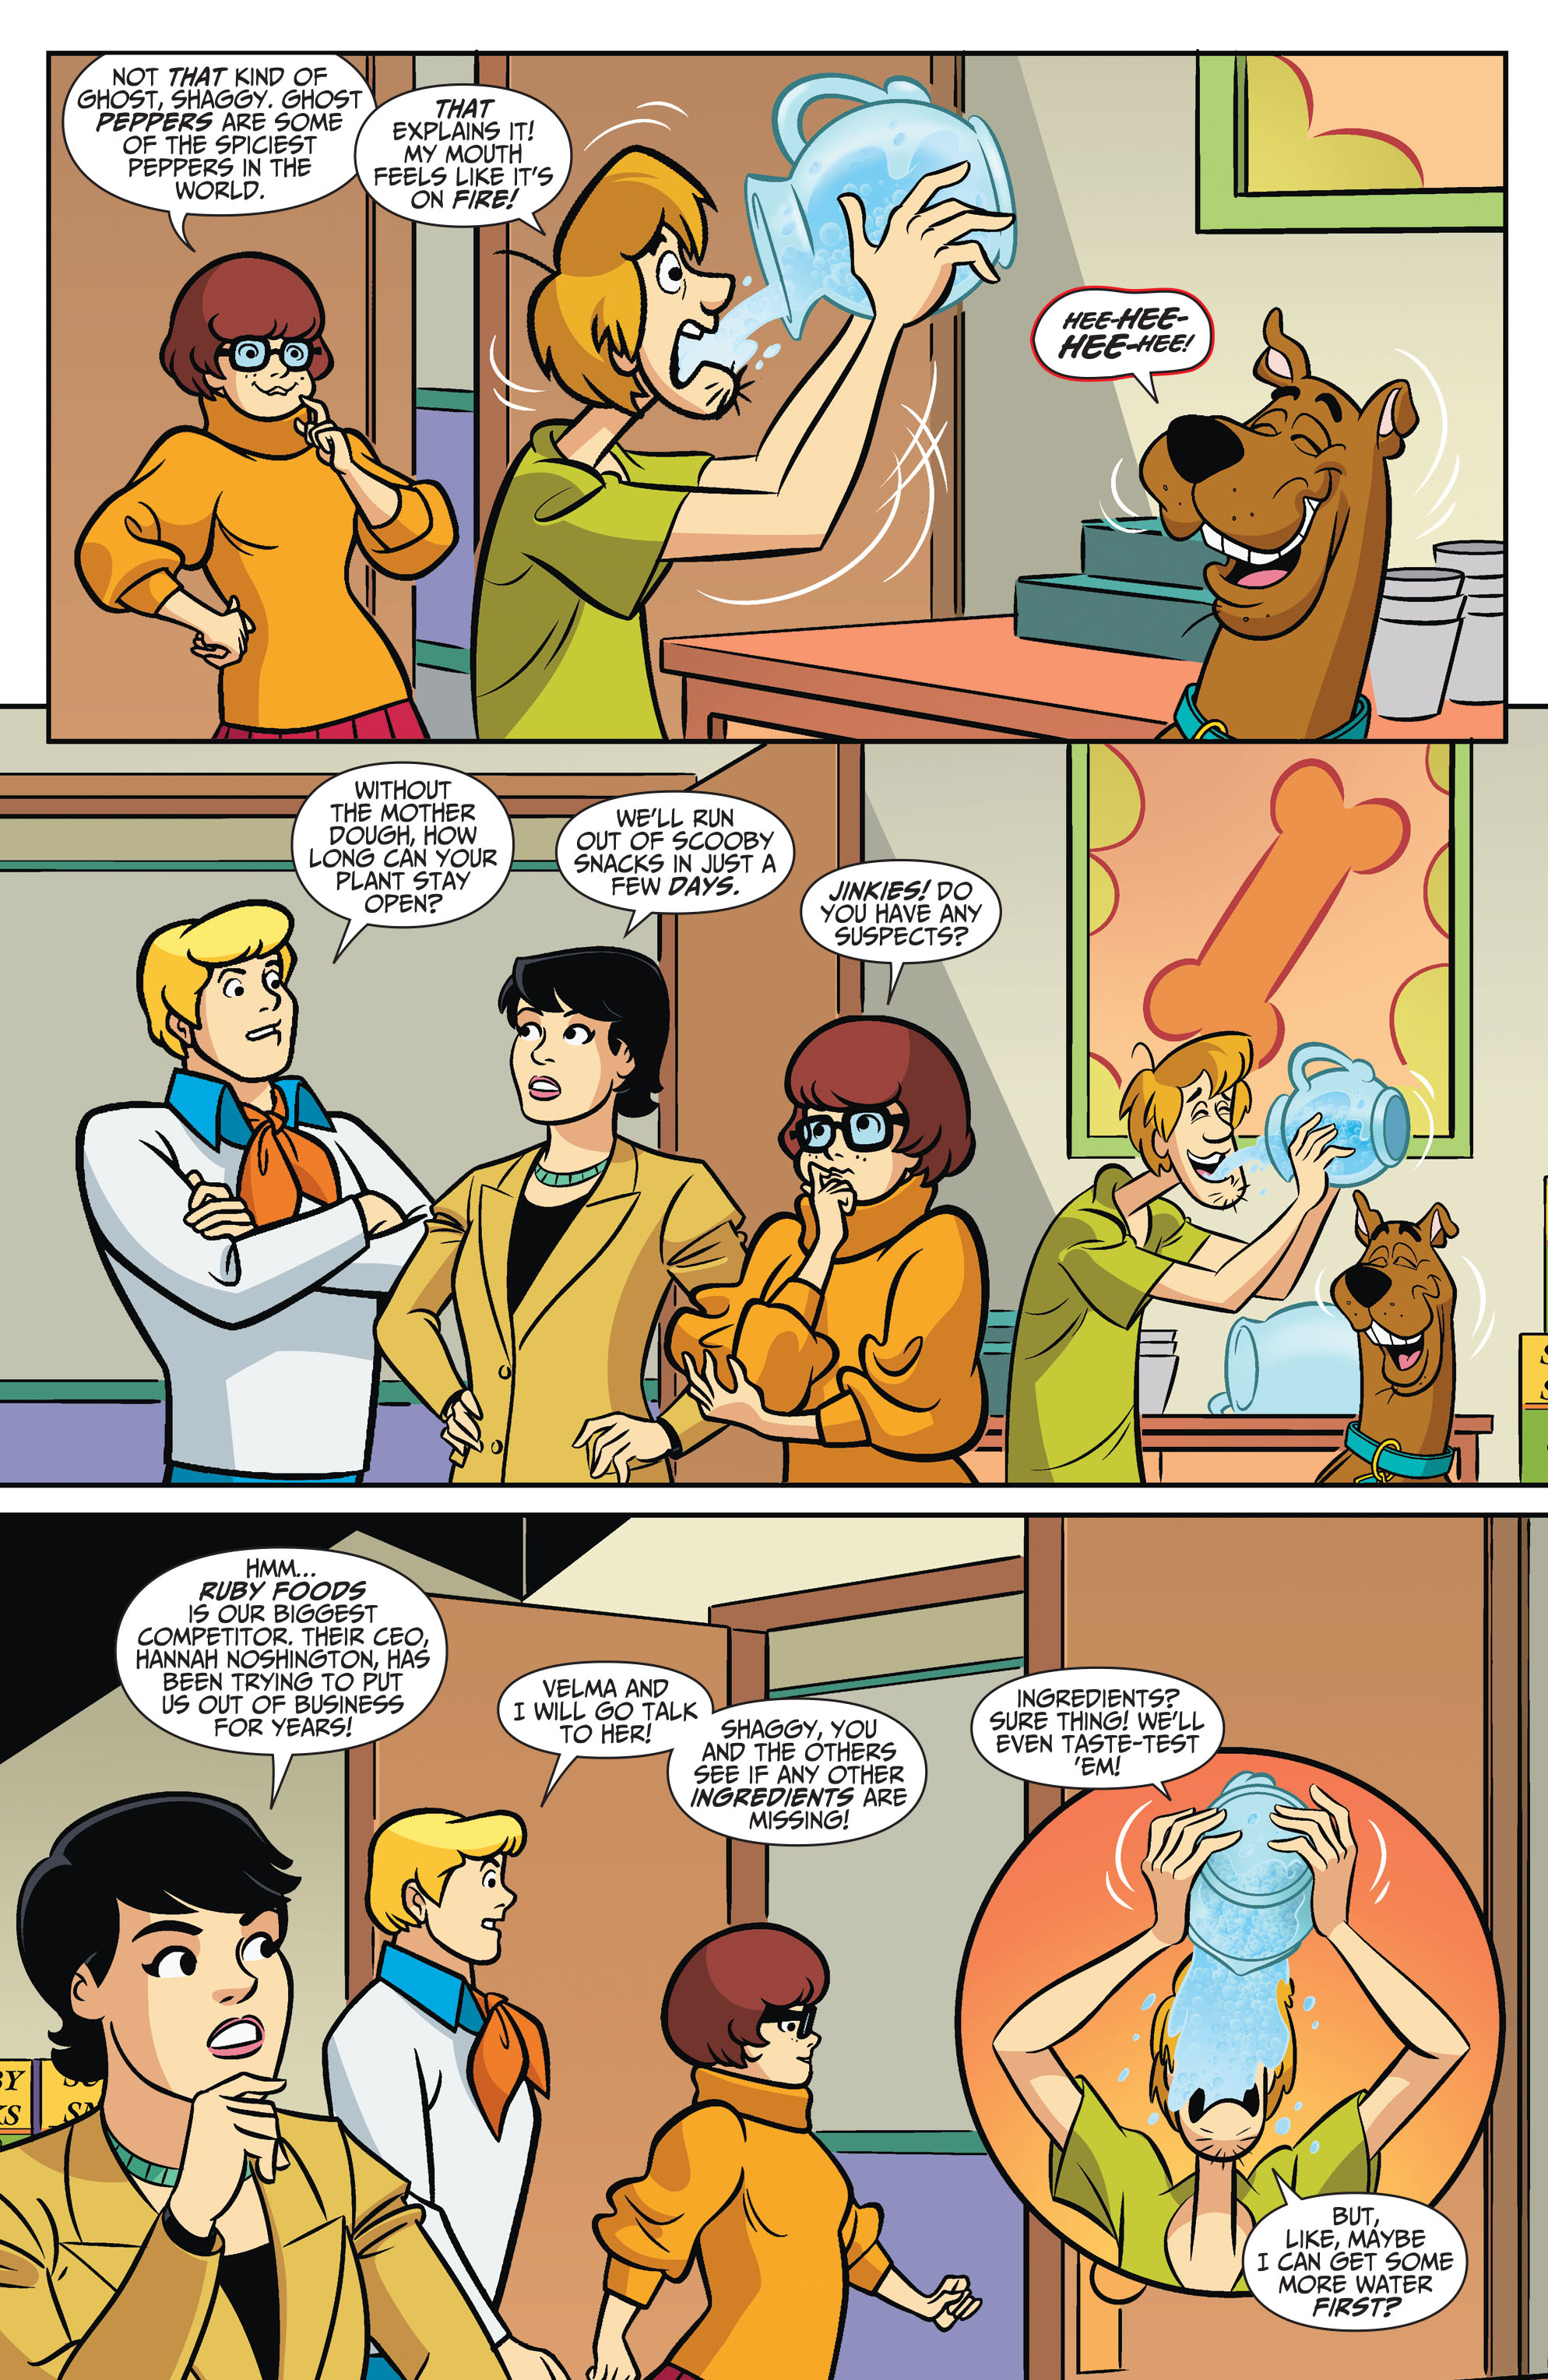 Scooby-Doo: Mystery Inc. (2020-): Chapter 1 - Page 4